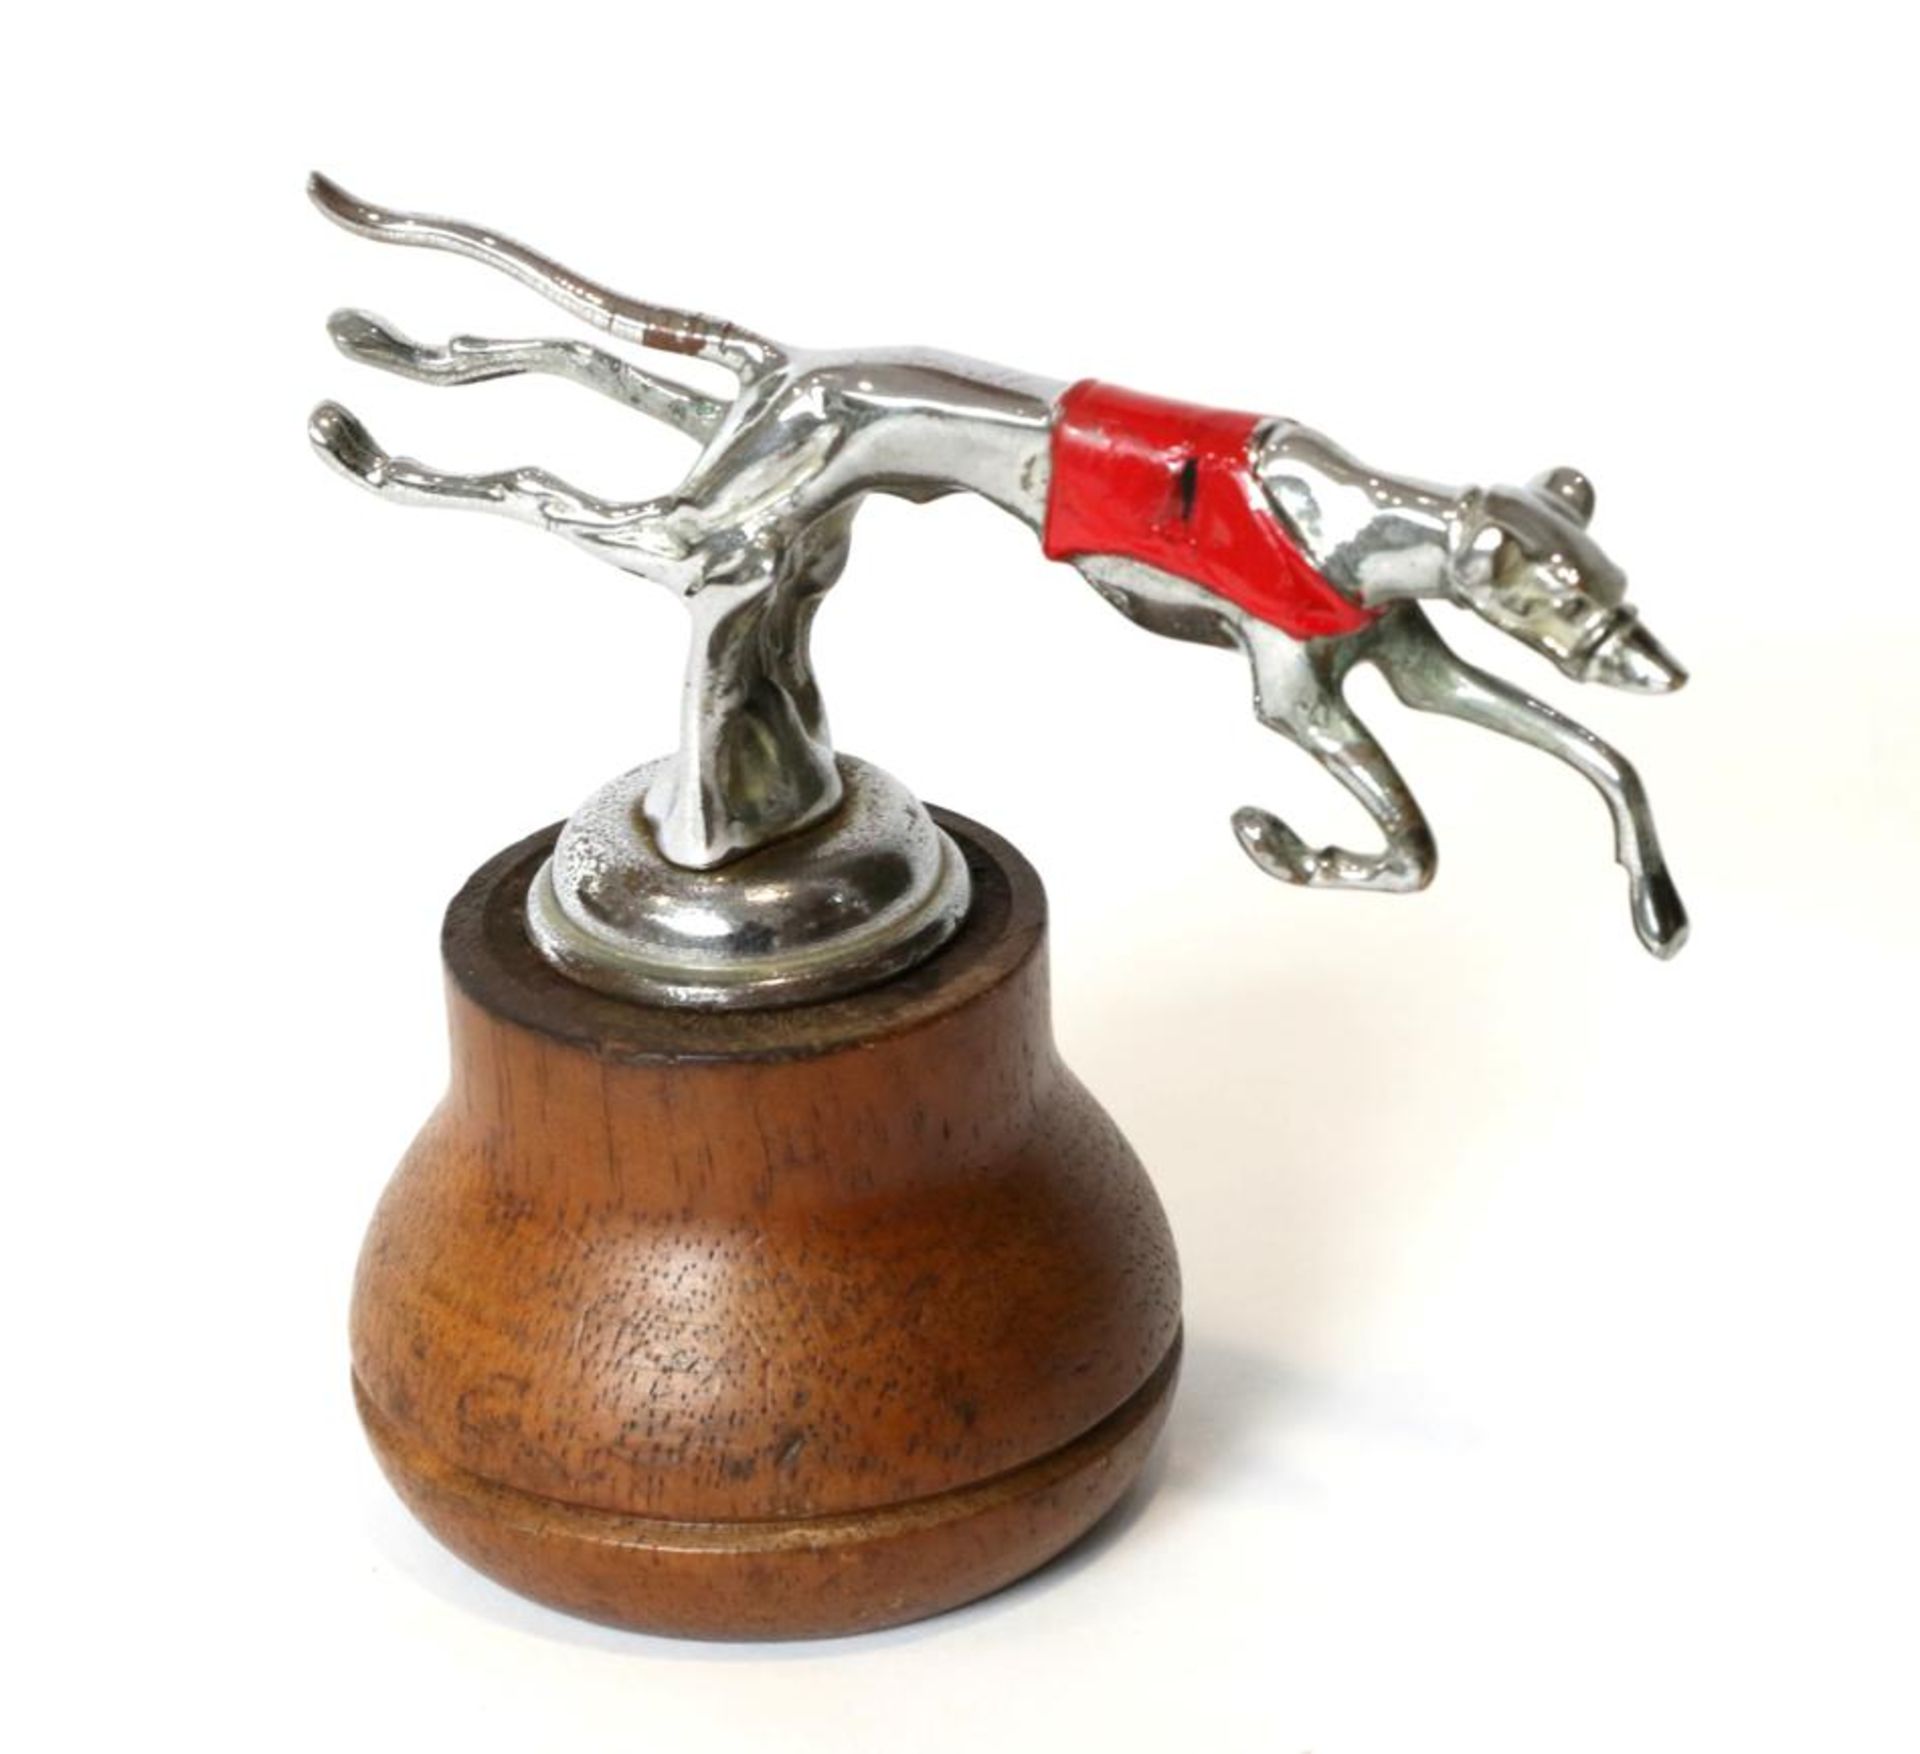 A 1930s Mascot of a Greyhound Leaping Over a Fence, chrome plated wuth red race coat display base